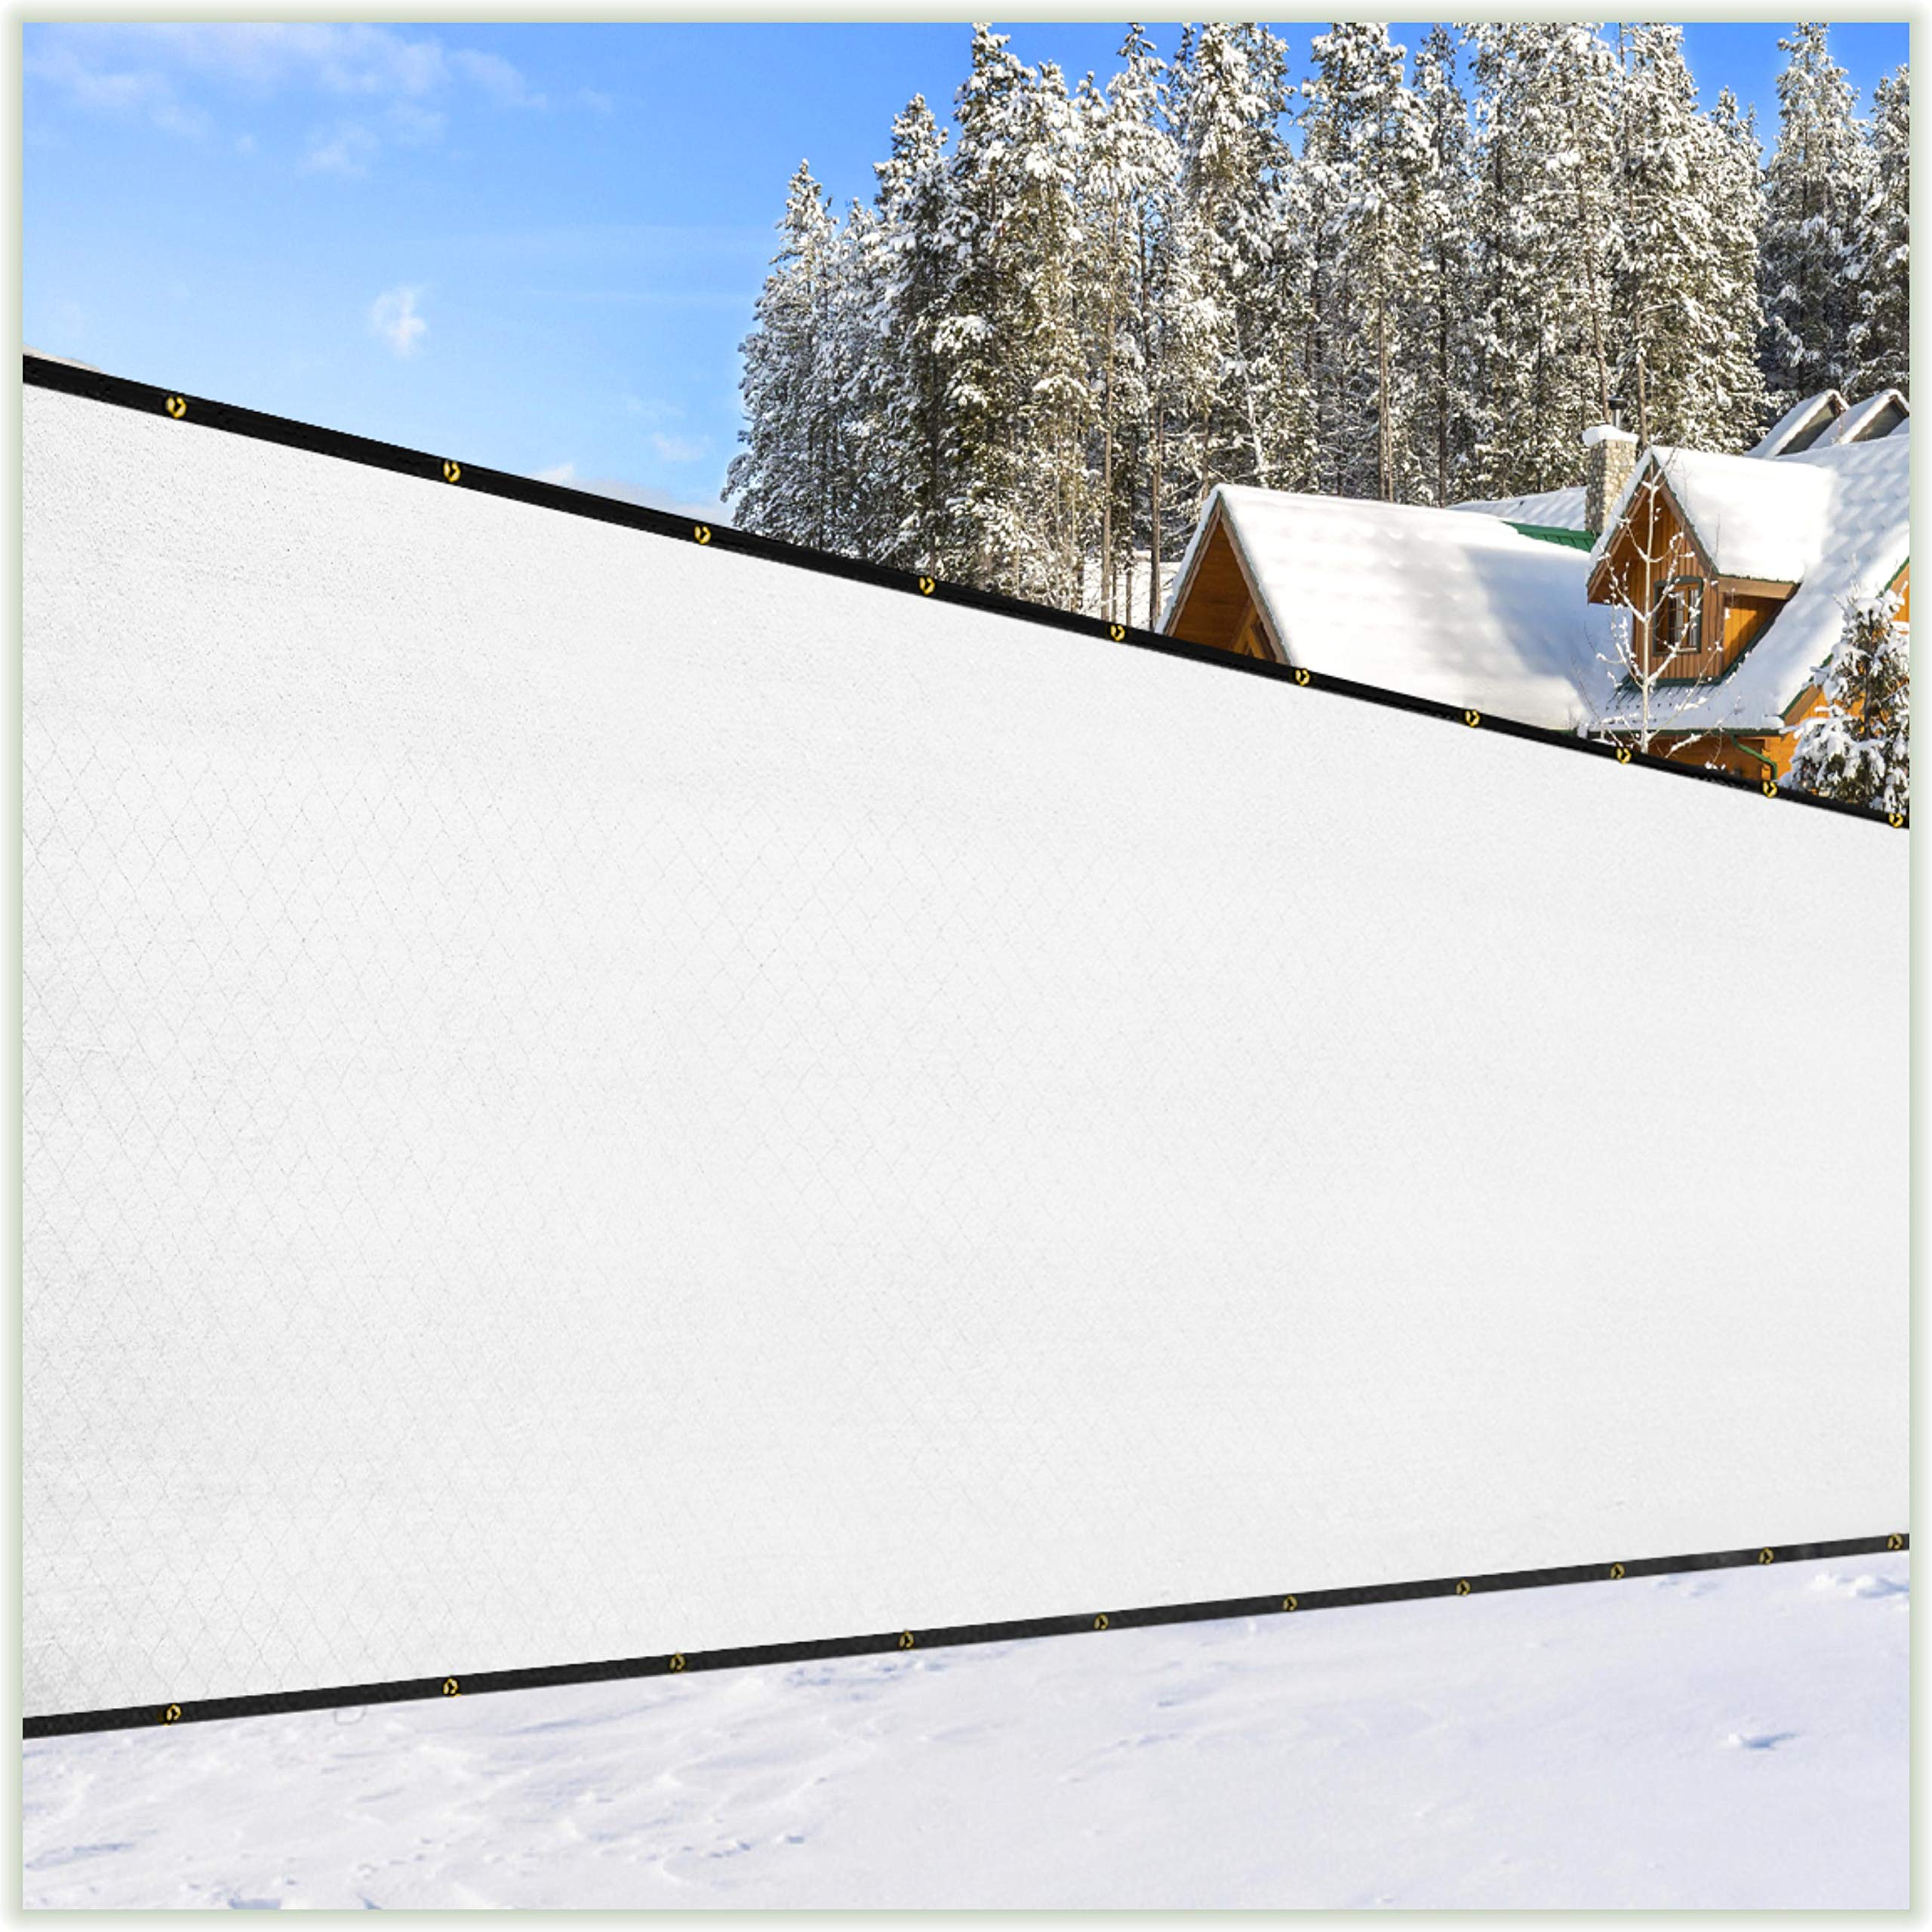 colourTree customized Size Fence Screen Privacy Screen White 8 x 194 - commercial grade 170 gSM - Heavy Duty - 3 Years Warranty 